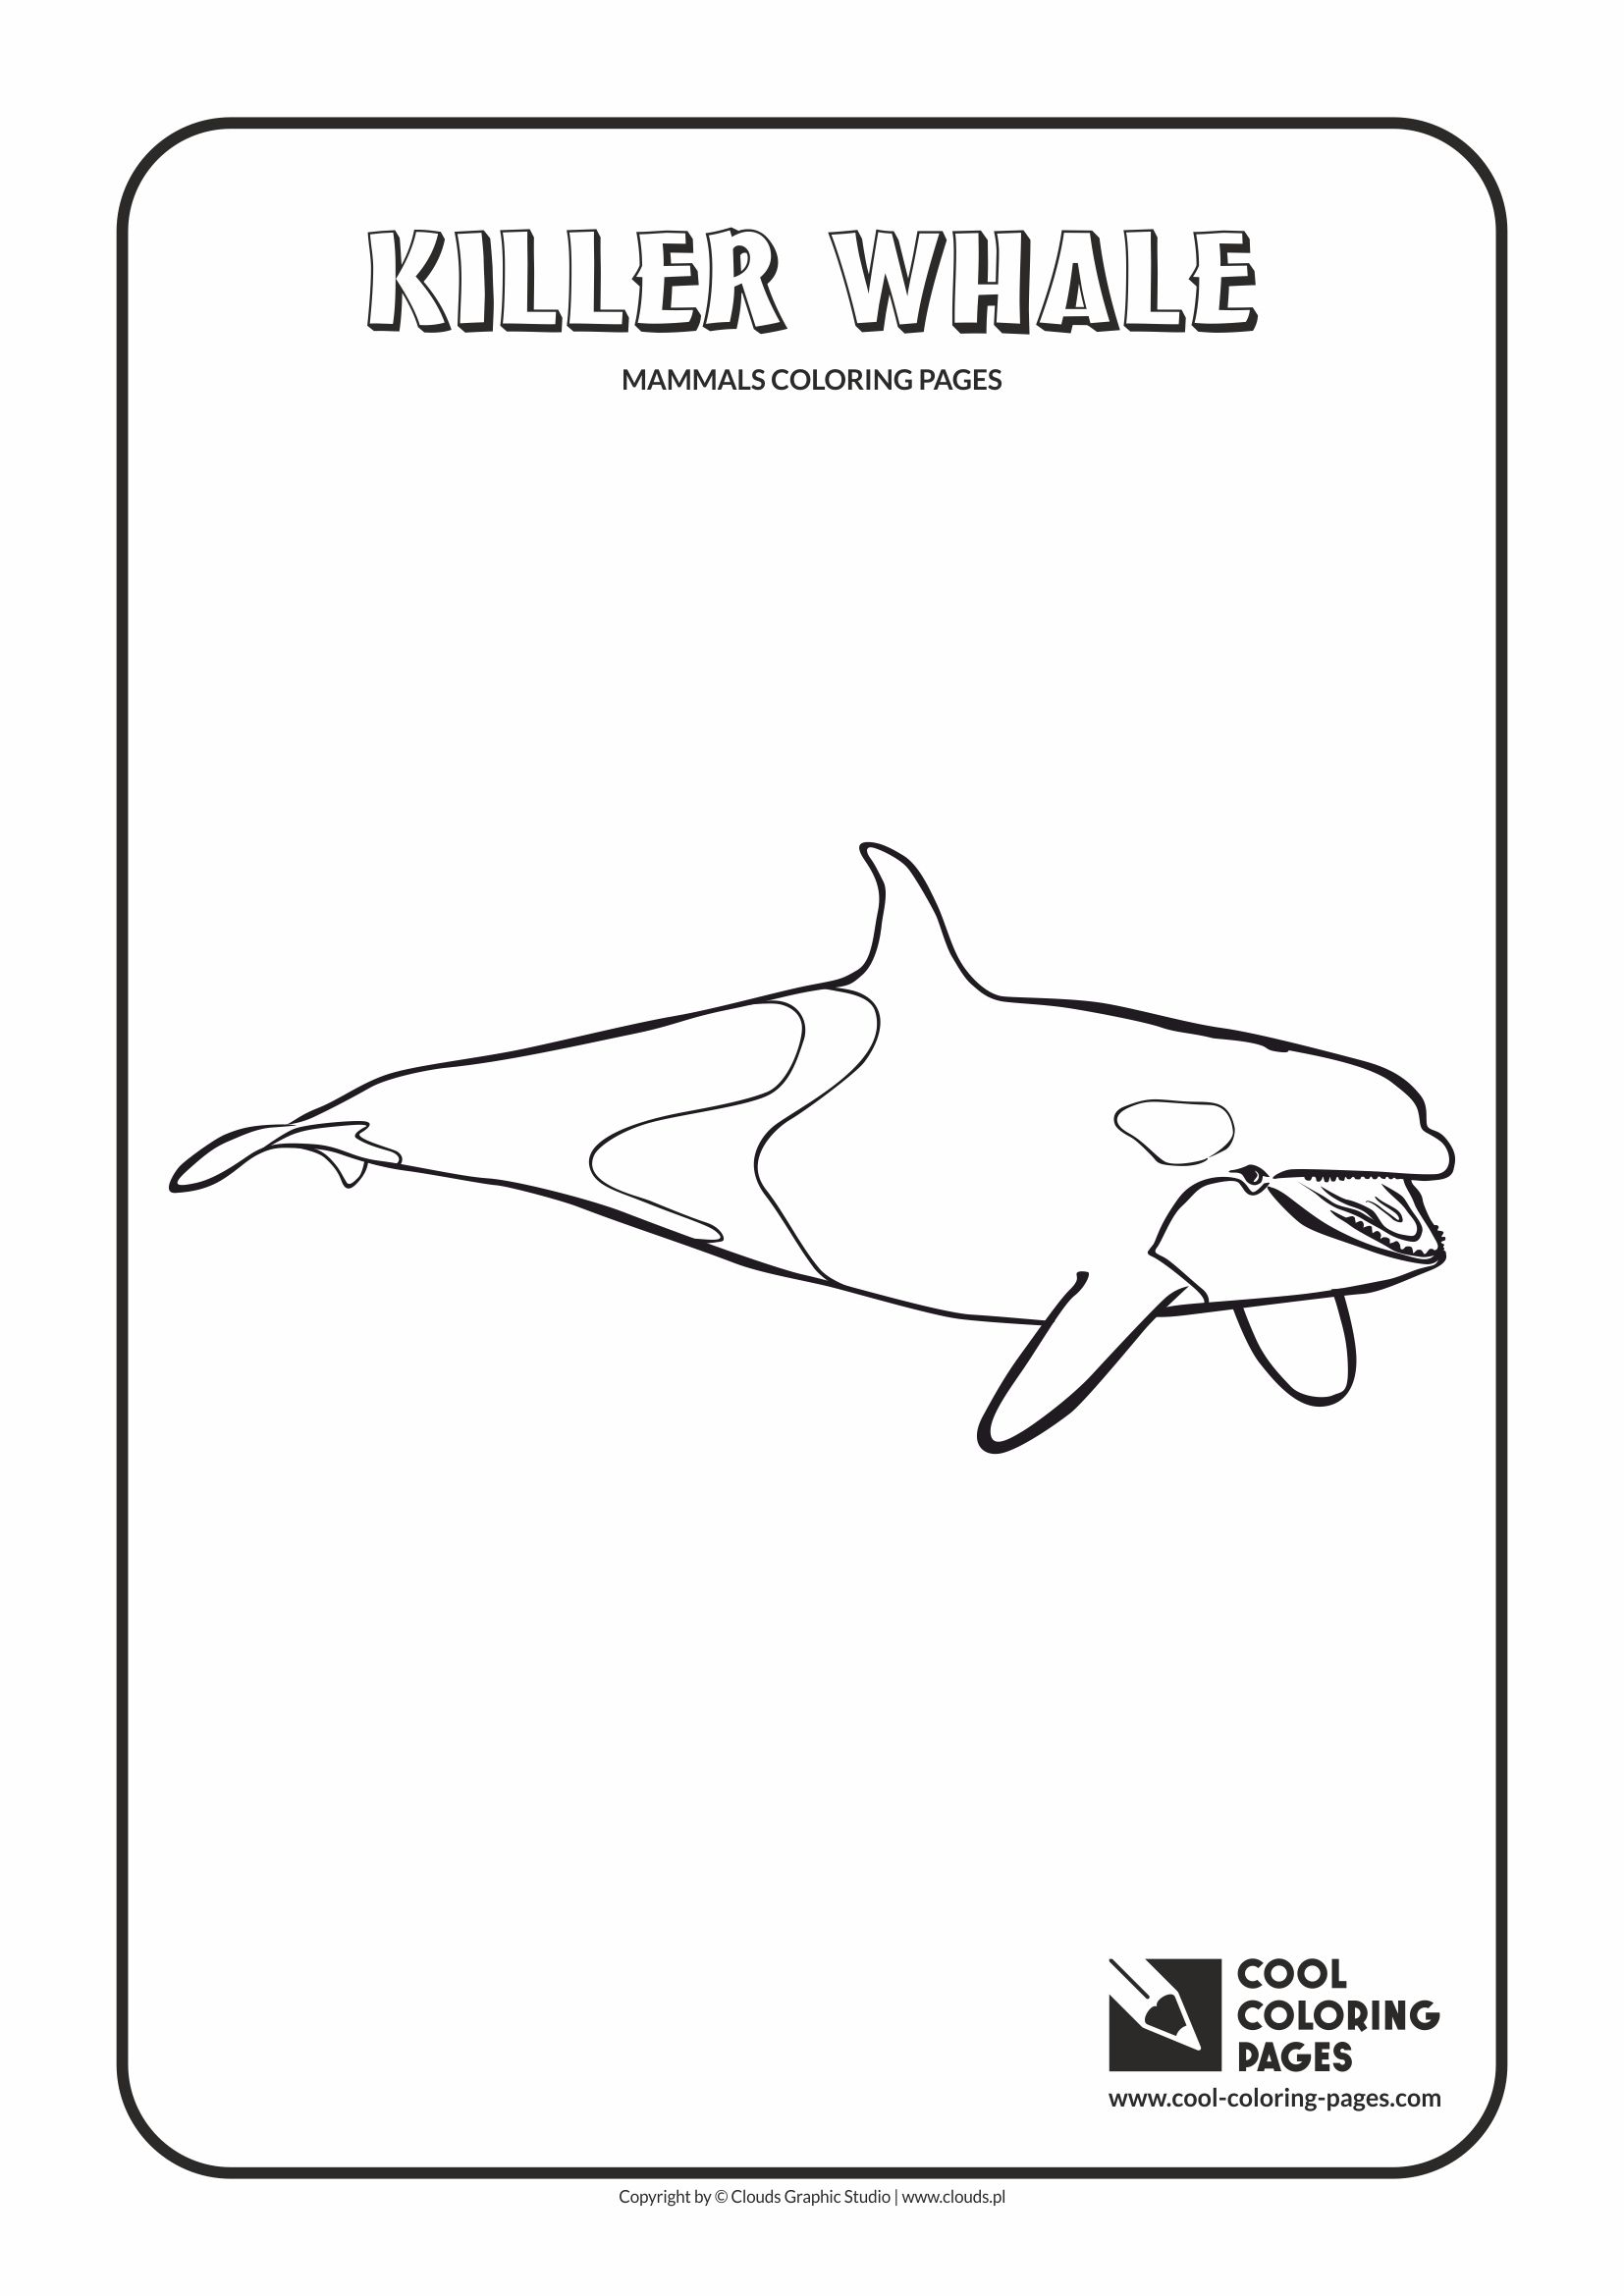 Cool Coloring Pages - Animals / Killer whale orca / Coloring page with killer whale orca